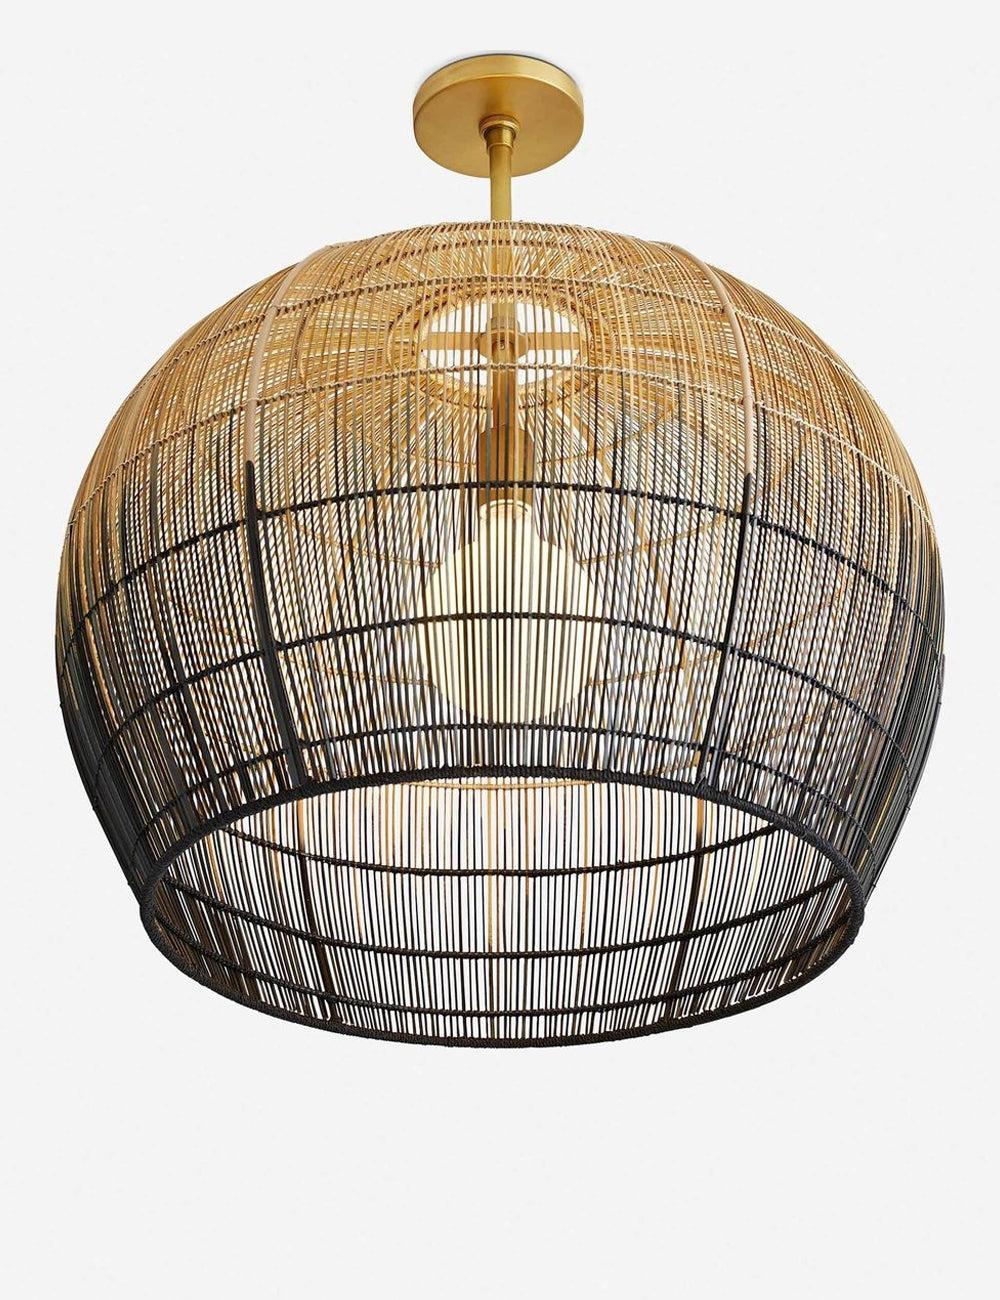 Ombre Black and Brass Dome Pendant with Woven Texture